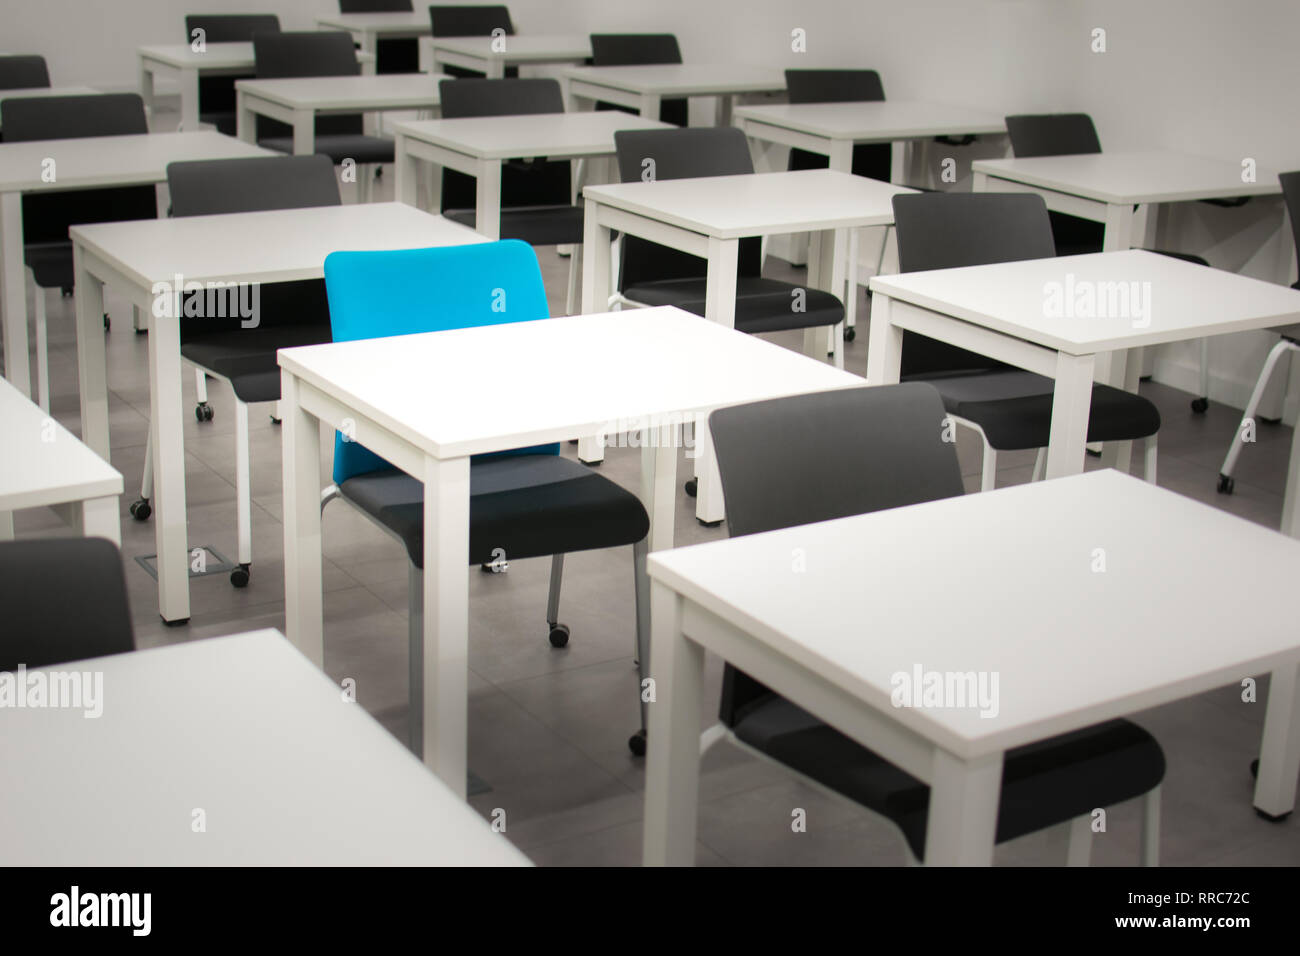 Classroom With Black Chairs And One Blue Chair Hiring Vacant Or